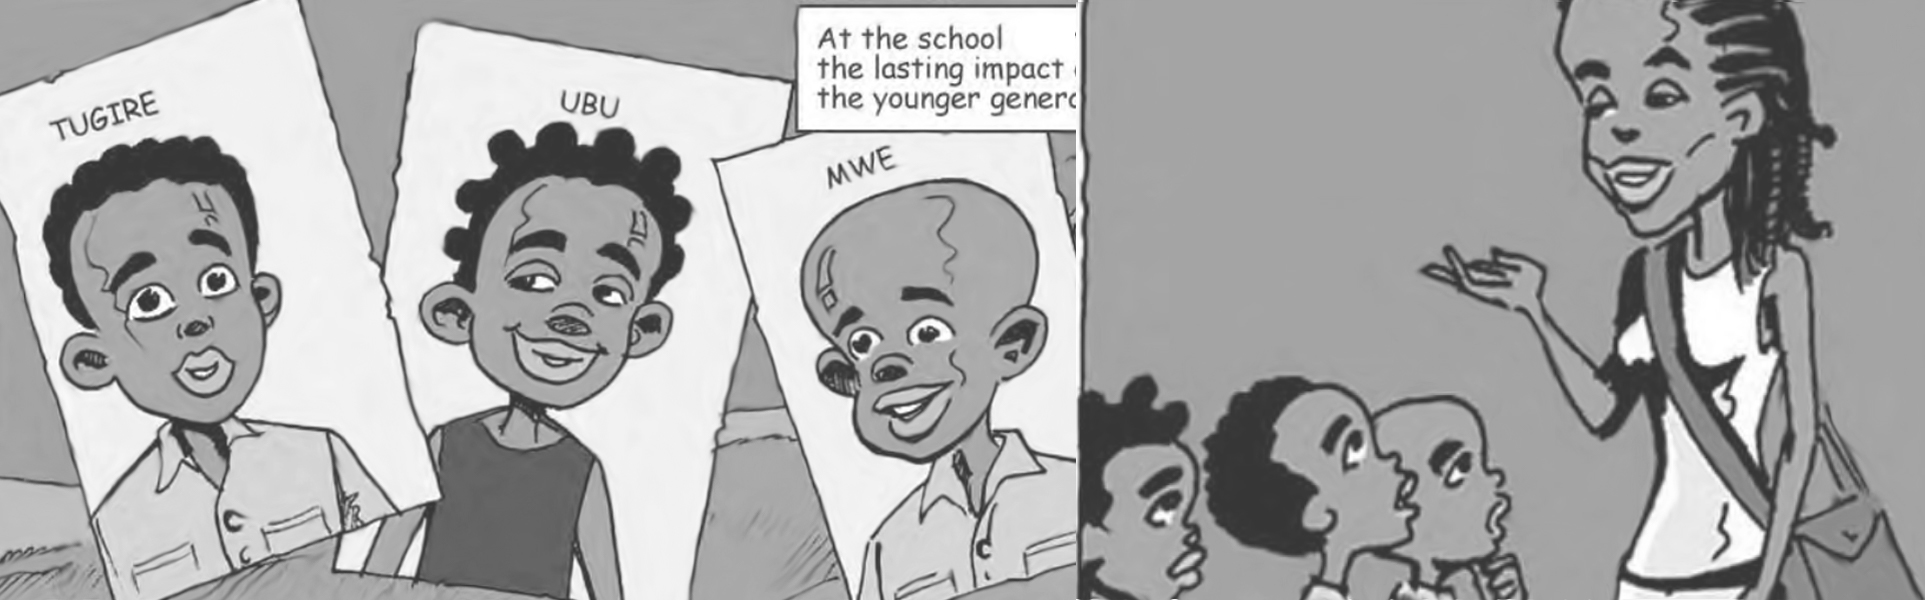 Frames from the graphic novel for a young audience about the Genocide in Rwanda.